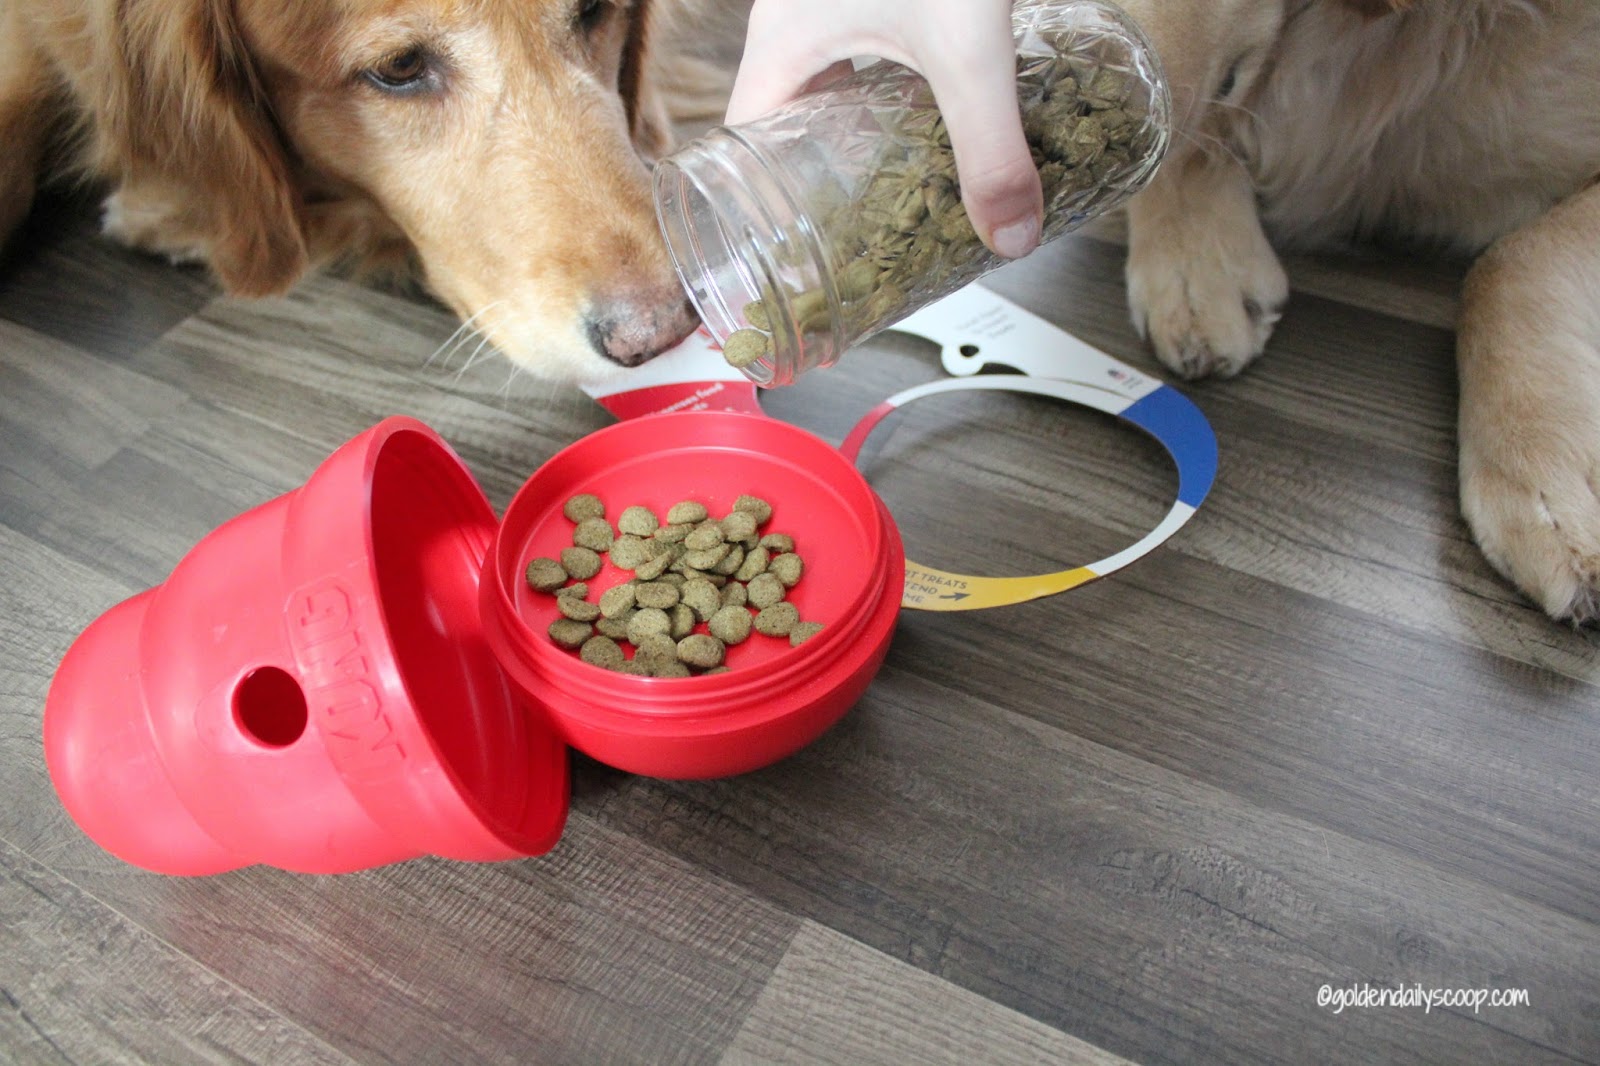 Chewy Delivers Kong Wobbler Fun #ChewyInfluencer - Golden Daily Scoop